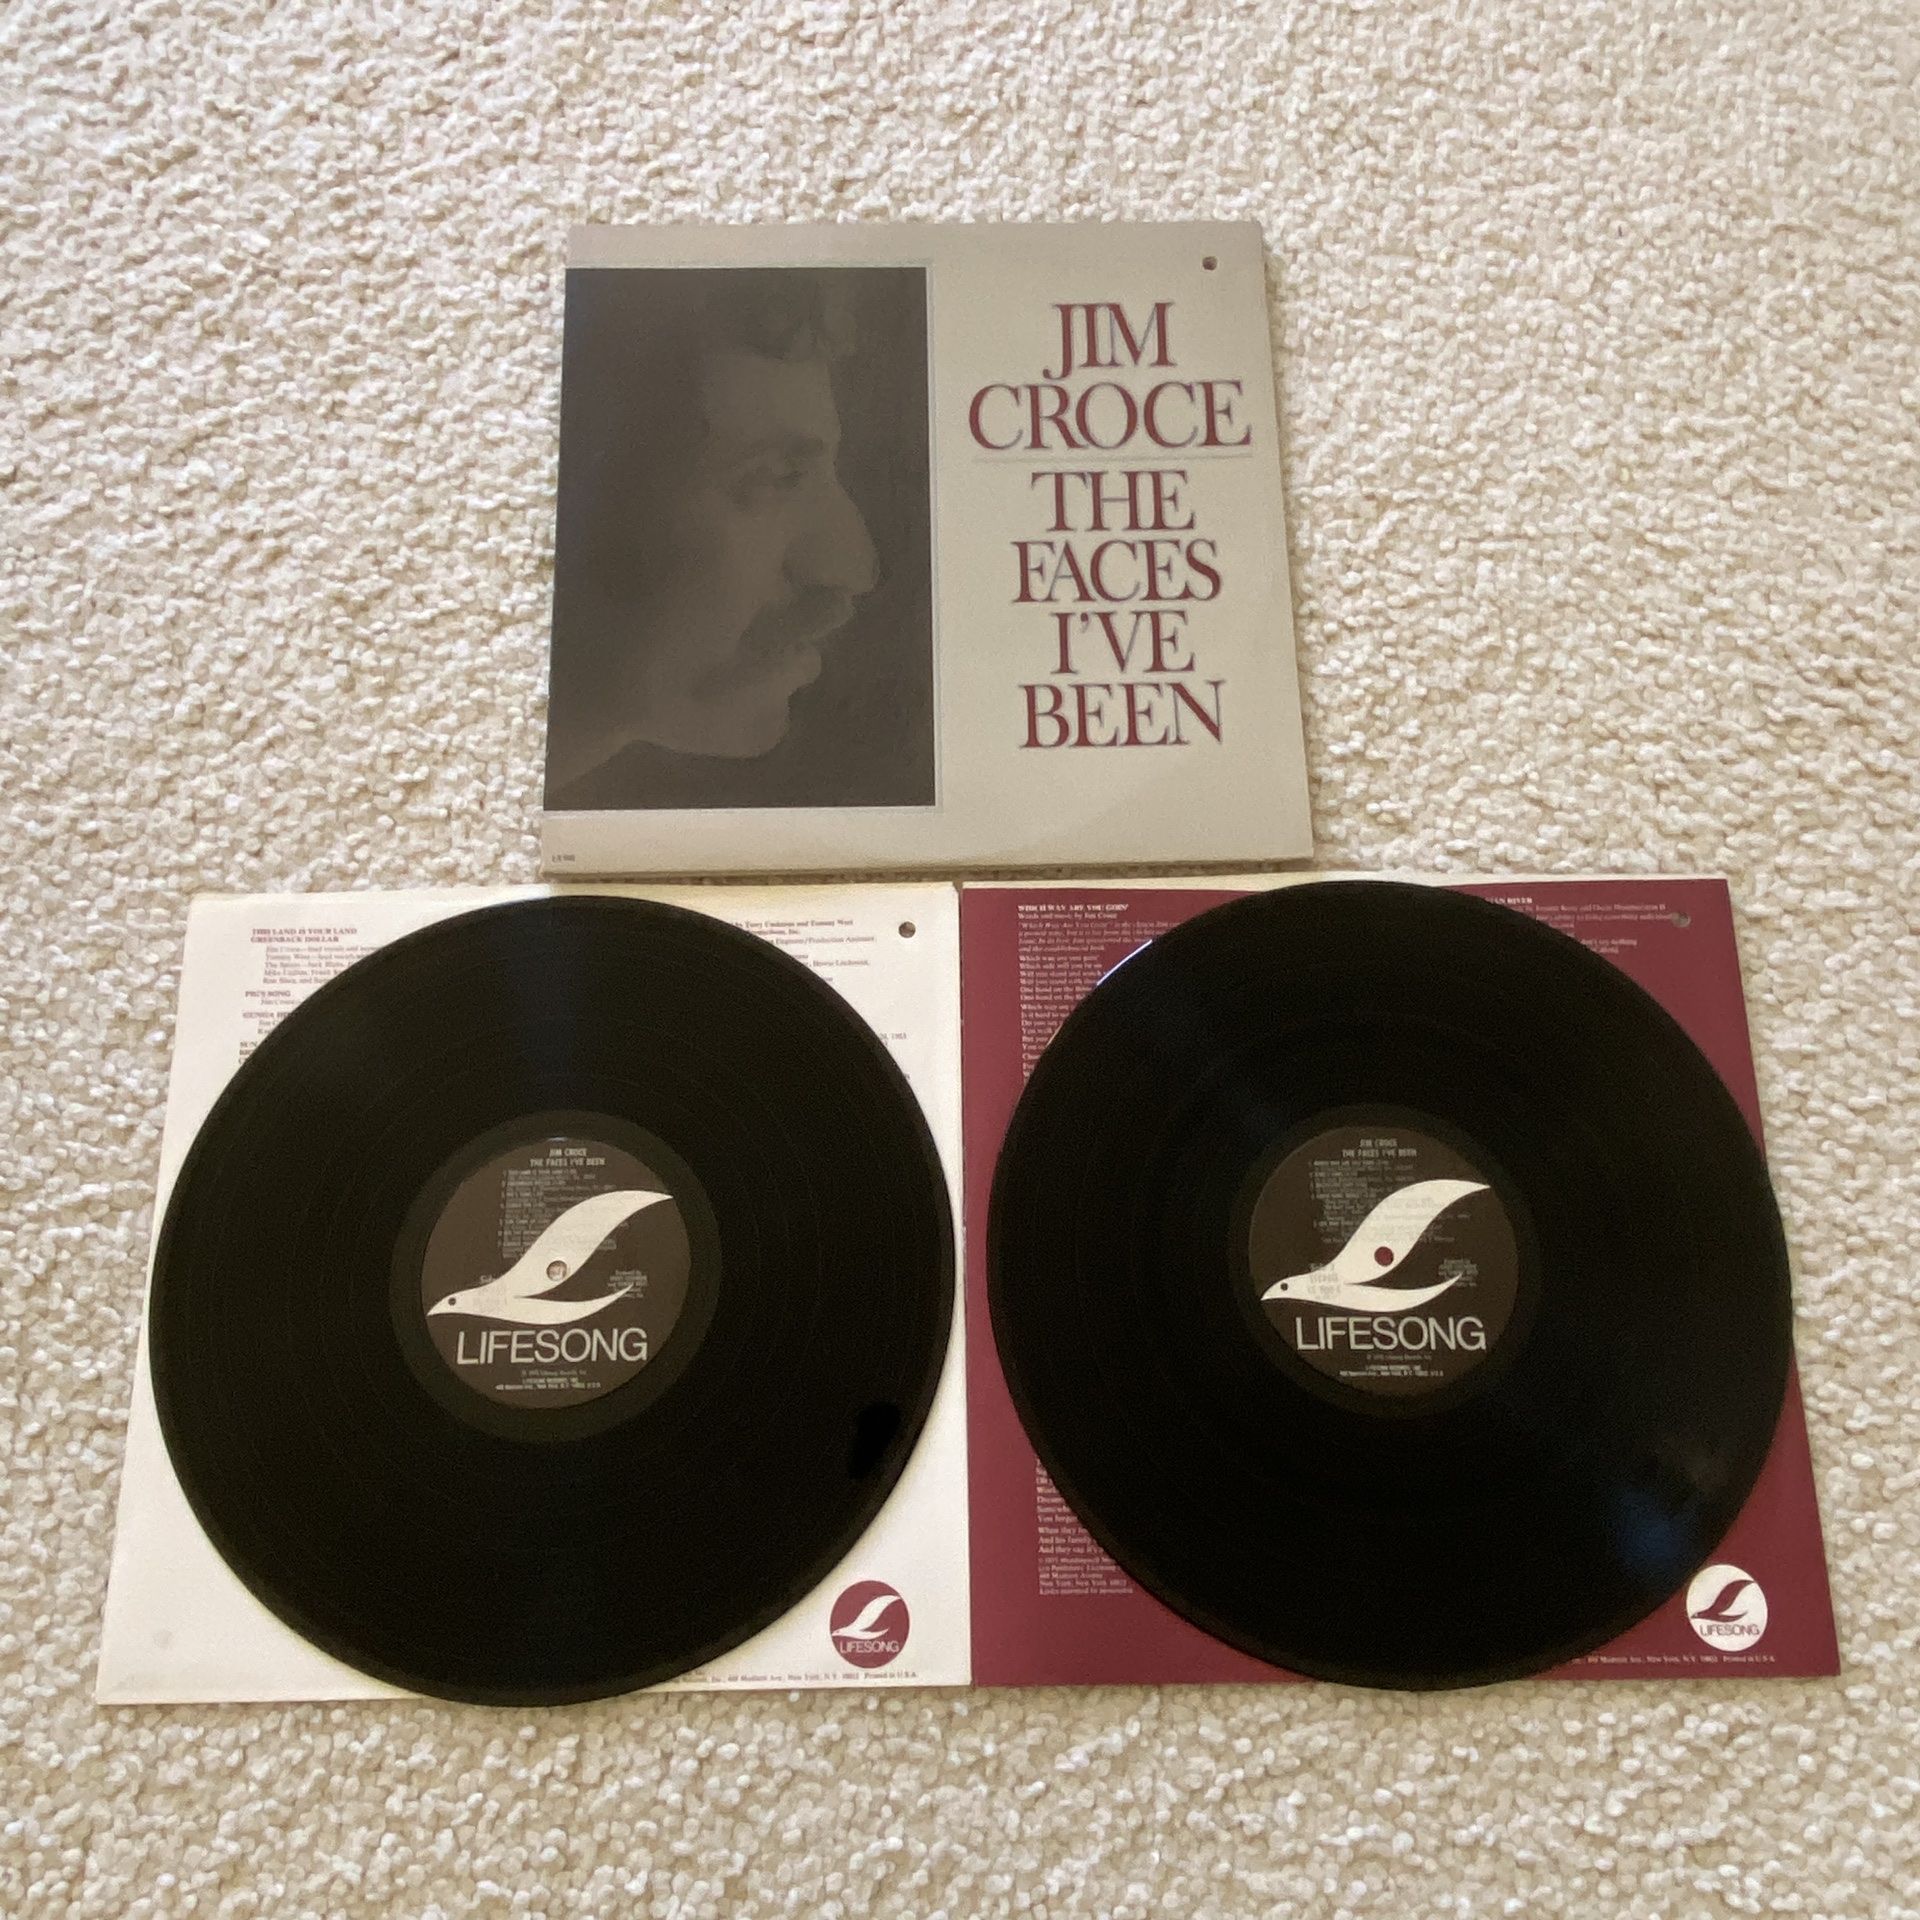 Jim Croce I've Been” double vinyl gatefold Lp with booklet 1975 Lifesong 1st Press pristine like new vinyl Folk Rock. for Sale in Laguna Niguel, CA - OfferUp